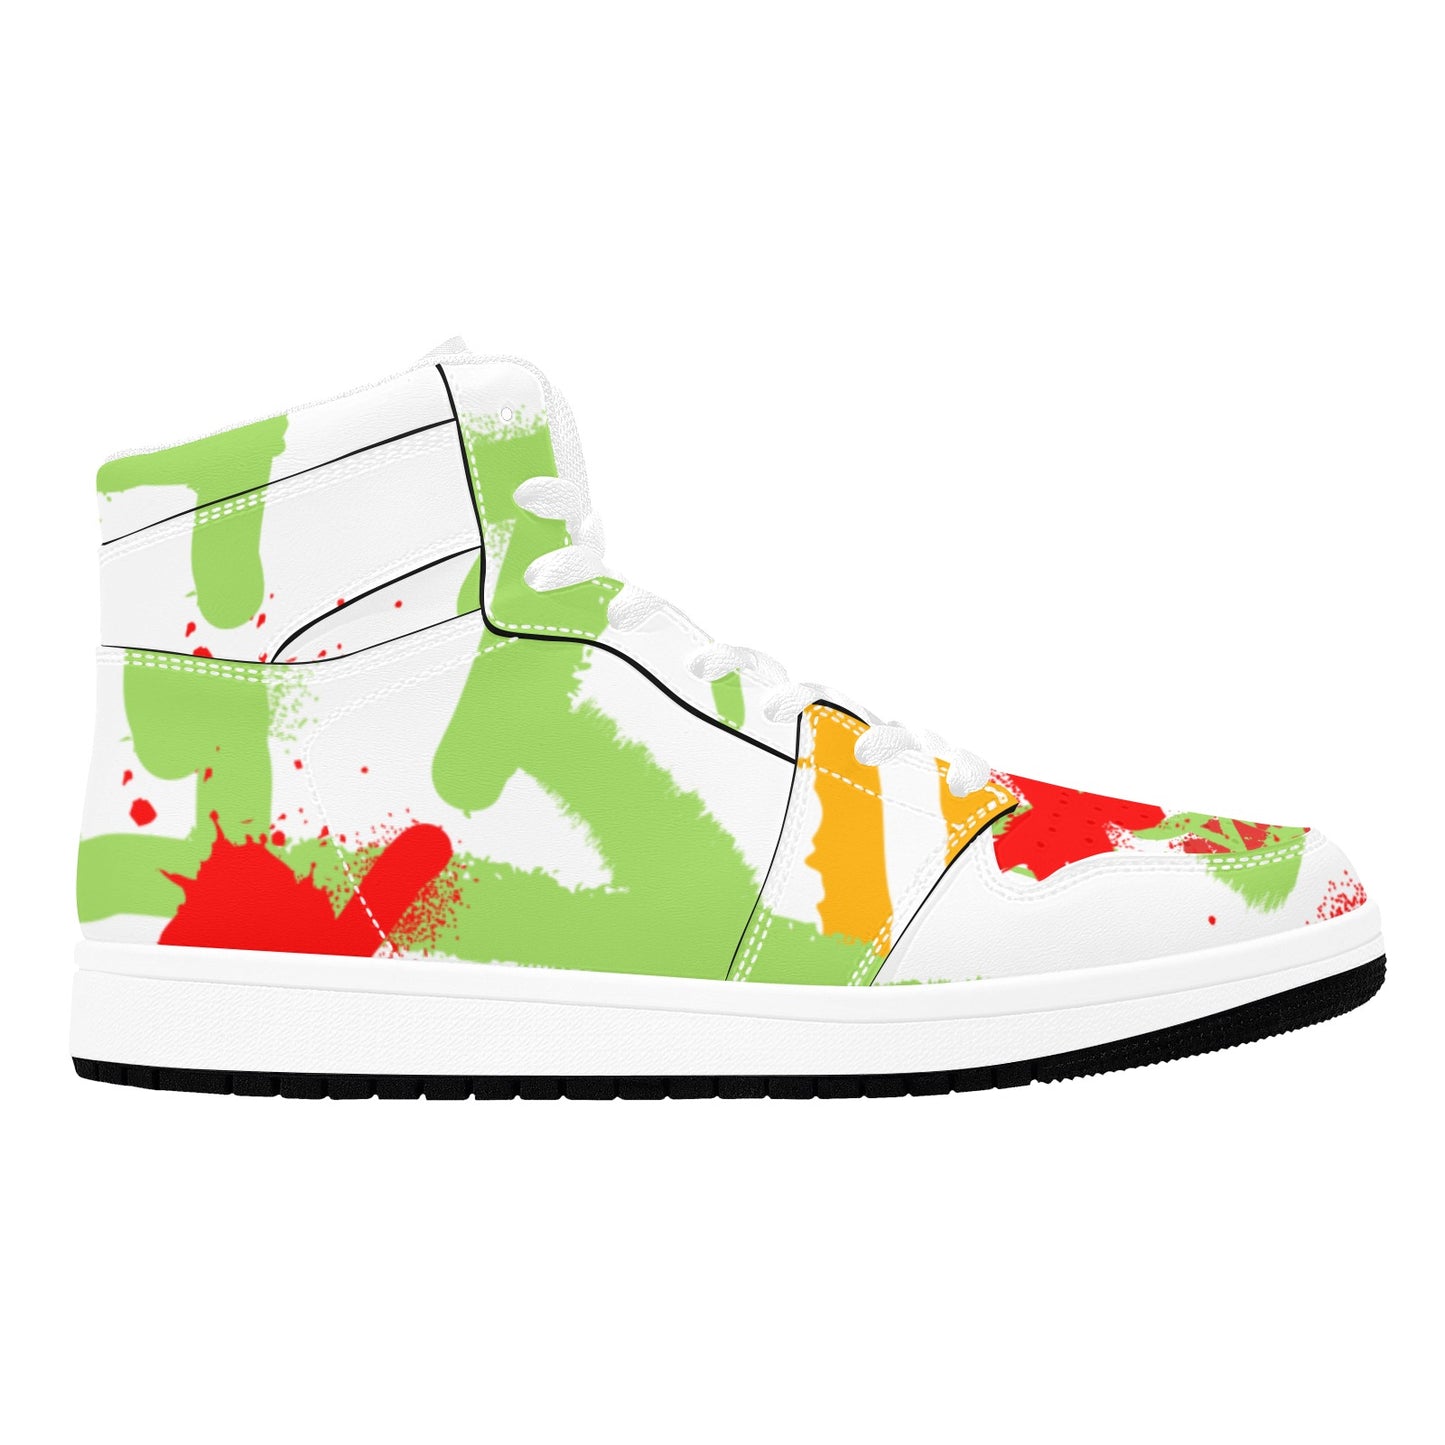 Spilled Paint Men's Sneakers